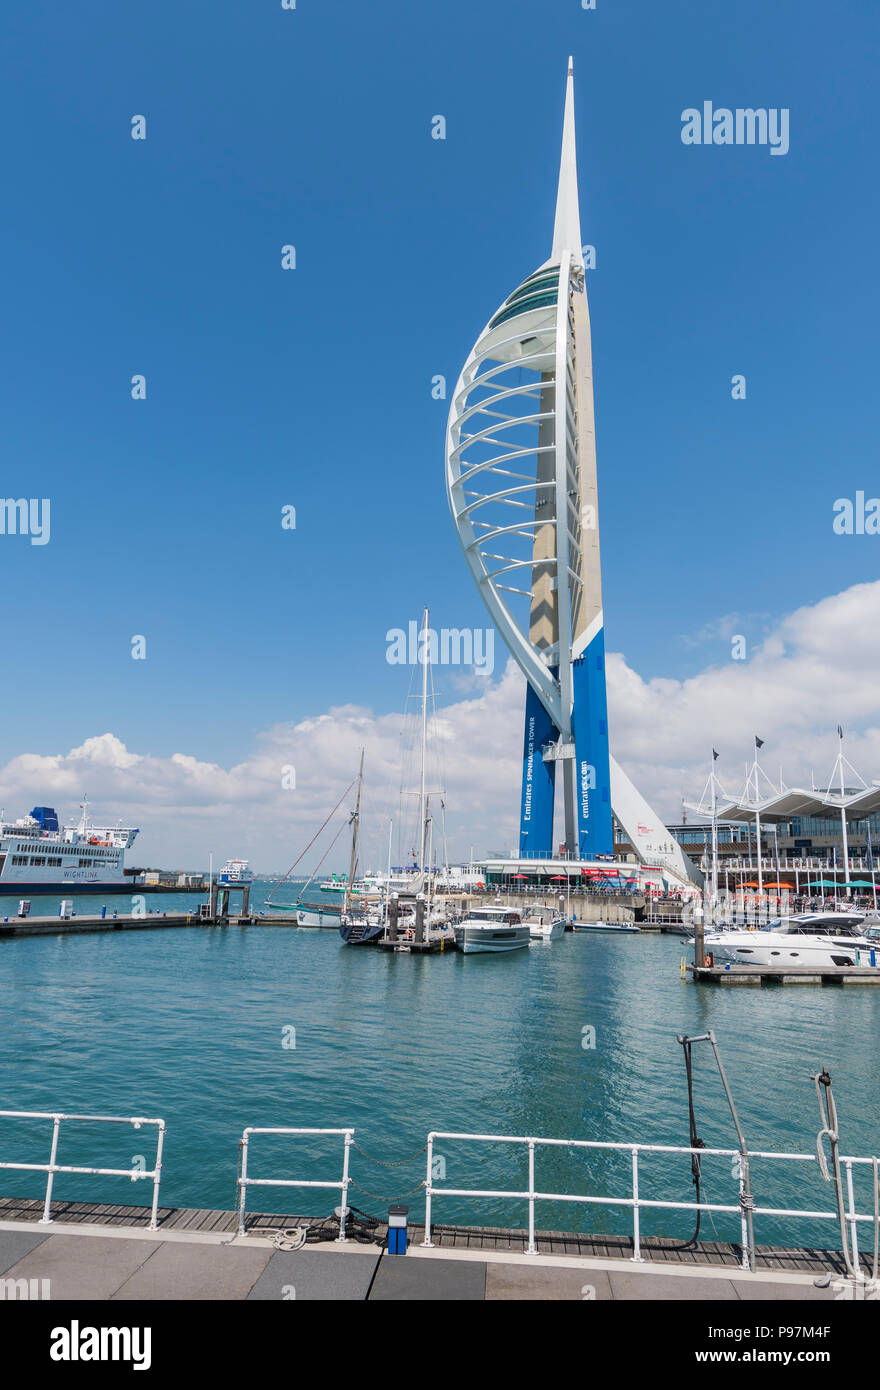 Emirate Spinnaker Tower in Gunwharf Quays, Portsmouth, Hampshire, England, UK. Emirates Tower portrait in Portsmouth. Stockfoto